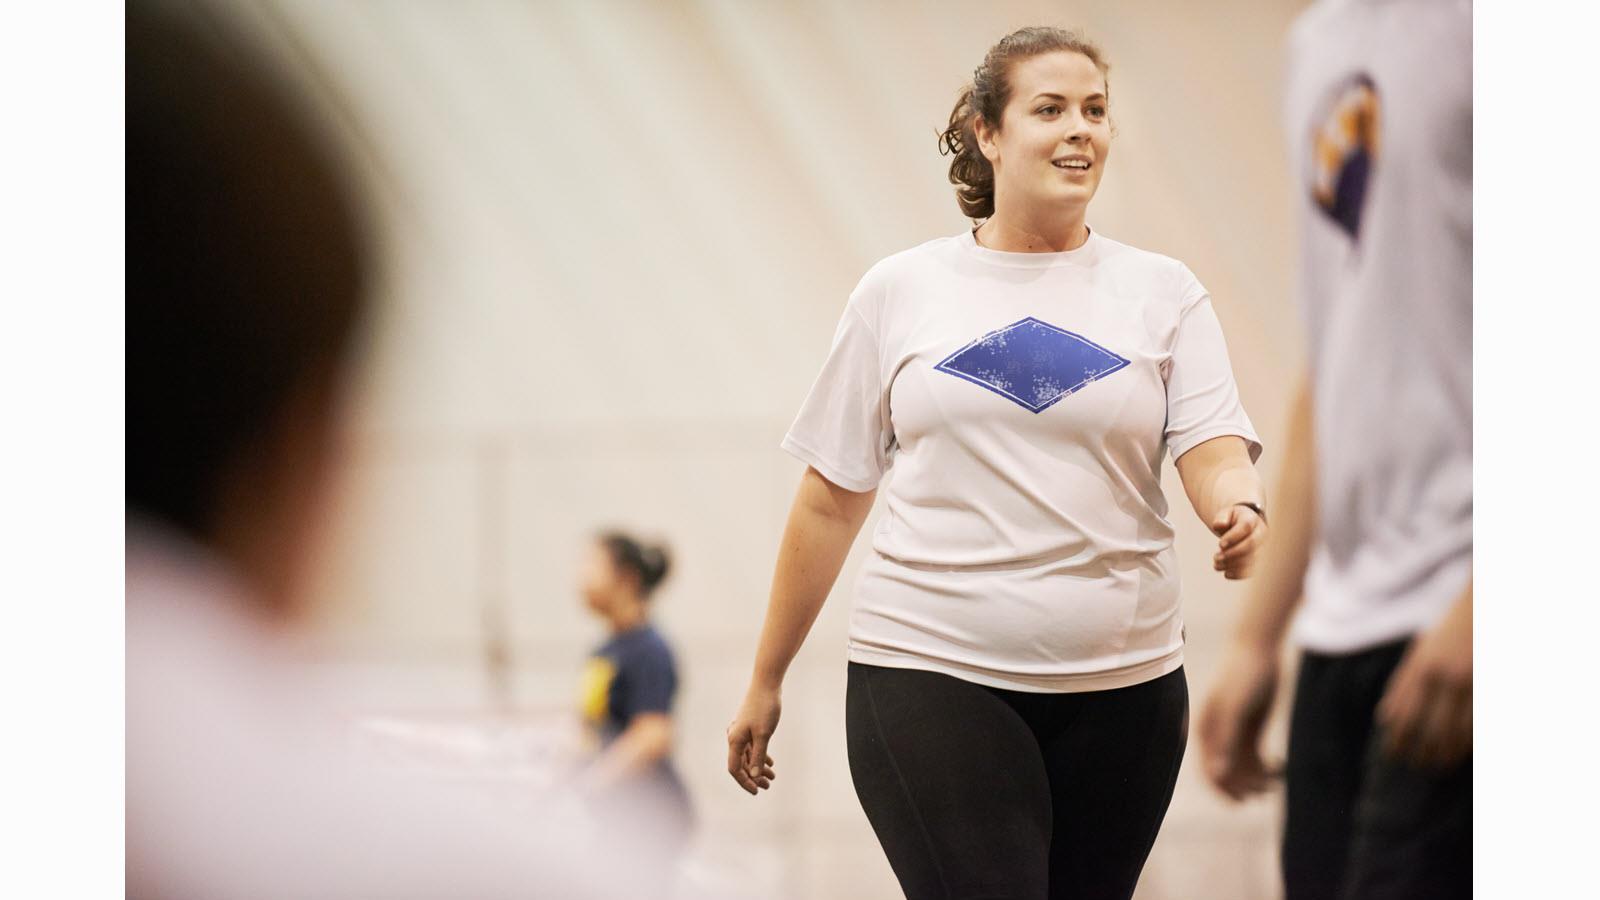 Curvy woman takes part in an exercise class